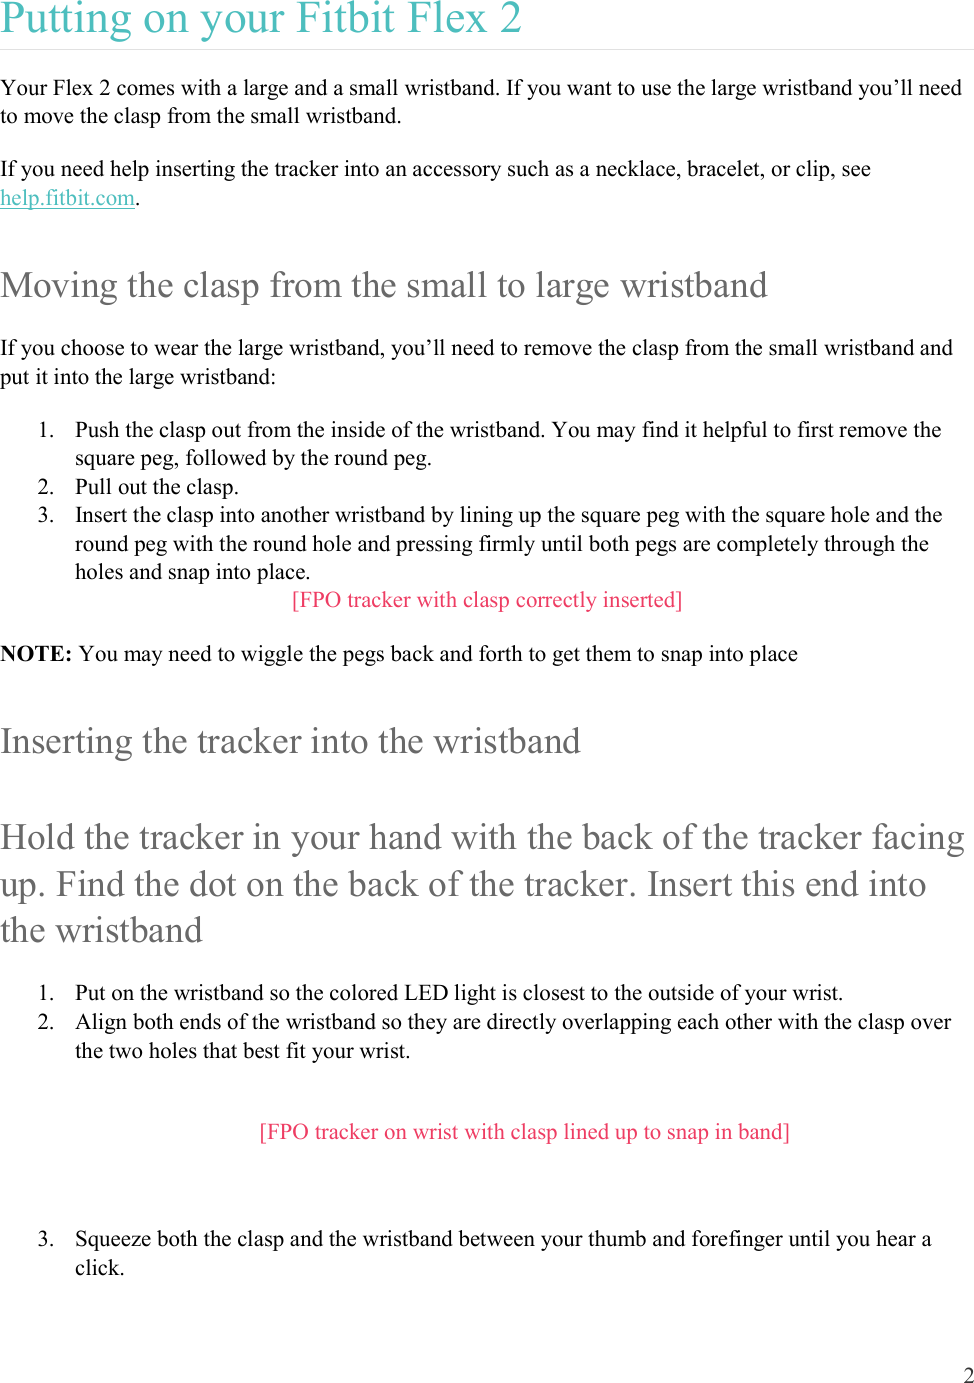 2  Putting on your Fitbit Flex 2 Your Flex 2 comes with a large and a small wristband. If you want to use the large wristband you’ll need to move the clasp from the small wristband.  If you need help inserting the tracker into an accessory such as a necklace, bracelet, or clip, see help.fitbit.com. Moving the clasp from the small to large wristband If you choose to wear the large wristband, you’ll need to remove the clasp from the small wristband and put it into the large wristband: 1. Push the clasp out from the inside of the wristband. You may find it helpful to first remove the square peg, followed by the round peg. 2. Pull out the clasp.  3. Insert the clasp into another wristband by lining up the square peg with the square hole and the round peg with the round hole and pressing firmly until both pegs are completely through the holes and snap into place. [FPO tracker with clasp correctly inserted] NOTE: You may need to wiggle the pegs back and forth to get them to snap into place  Inserting the tracker into the wristband Hold the tracker in your hand with the back of the tracker facing up. Find the dot on the back of the tracker. Insert this end into the wristband 1. Put on the wristband so the colored LED light is closest to the outside of your wrist. 2. Align both ends of the wristband so they are directly overlapping each other with the clasp over the two holes that best fit your wrist.  [FPO tracker on wrist with clasp lined up to snap in band]  3. Squeeze both the clasp and the wristband between your thumb and forefinger until you hear a click.  